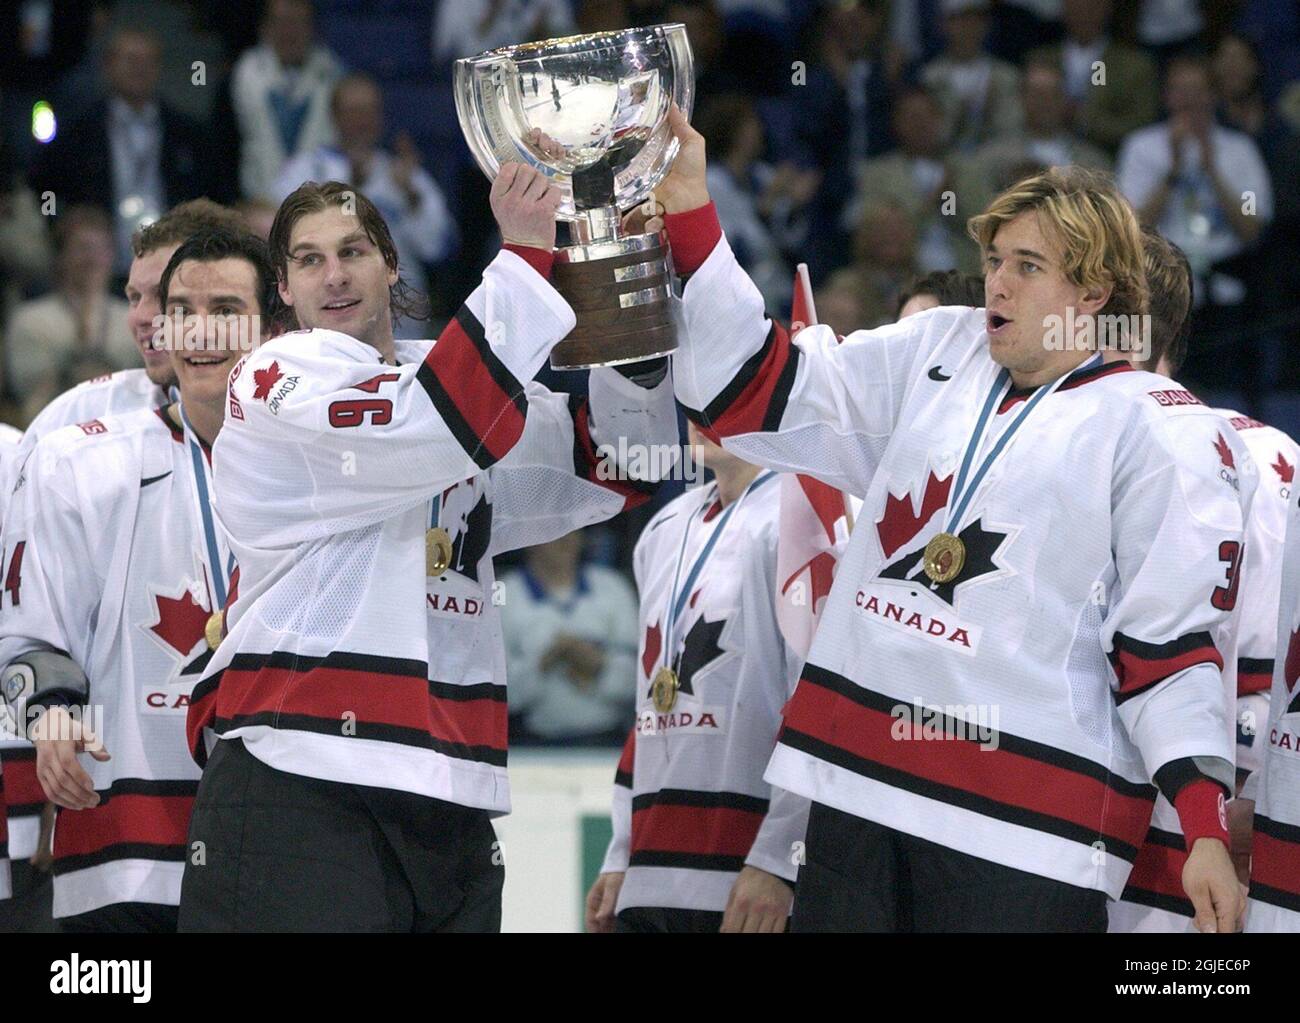 Ryan smyth hi-res stock photography and images - Alamy